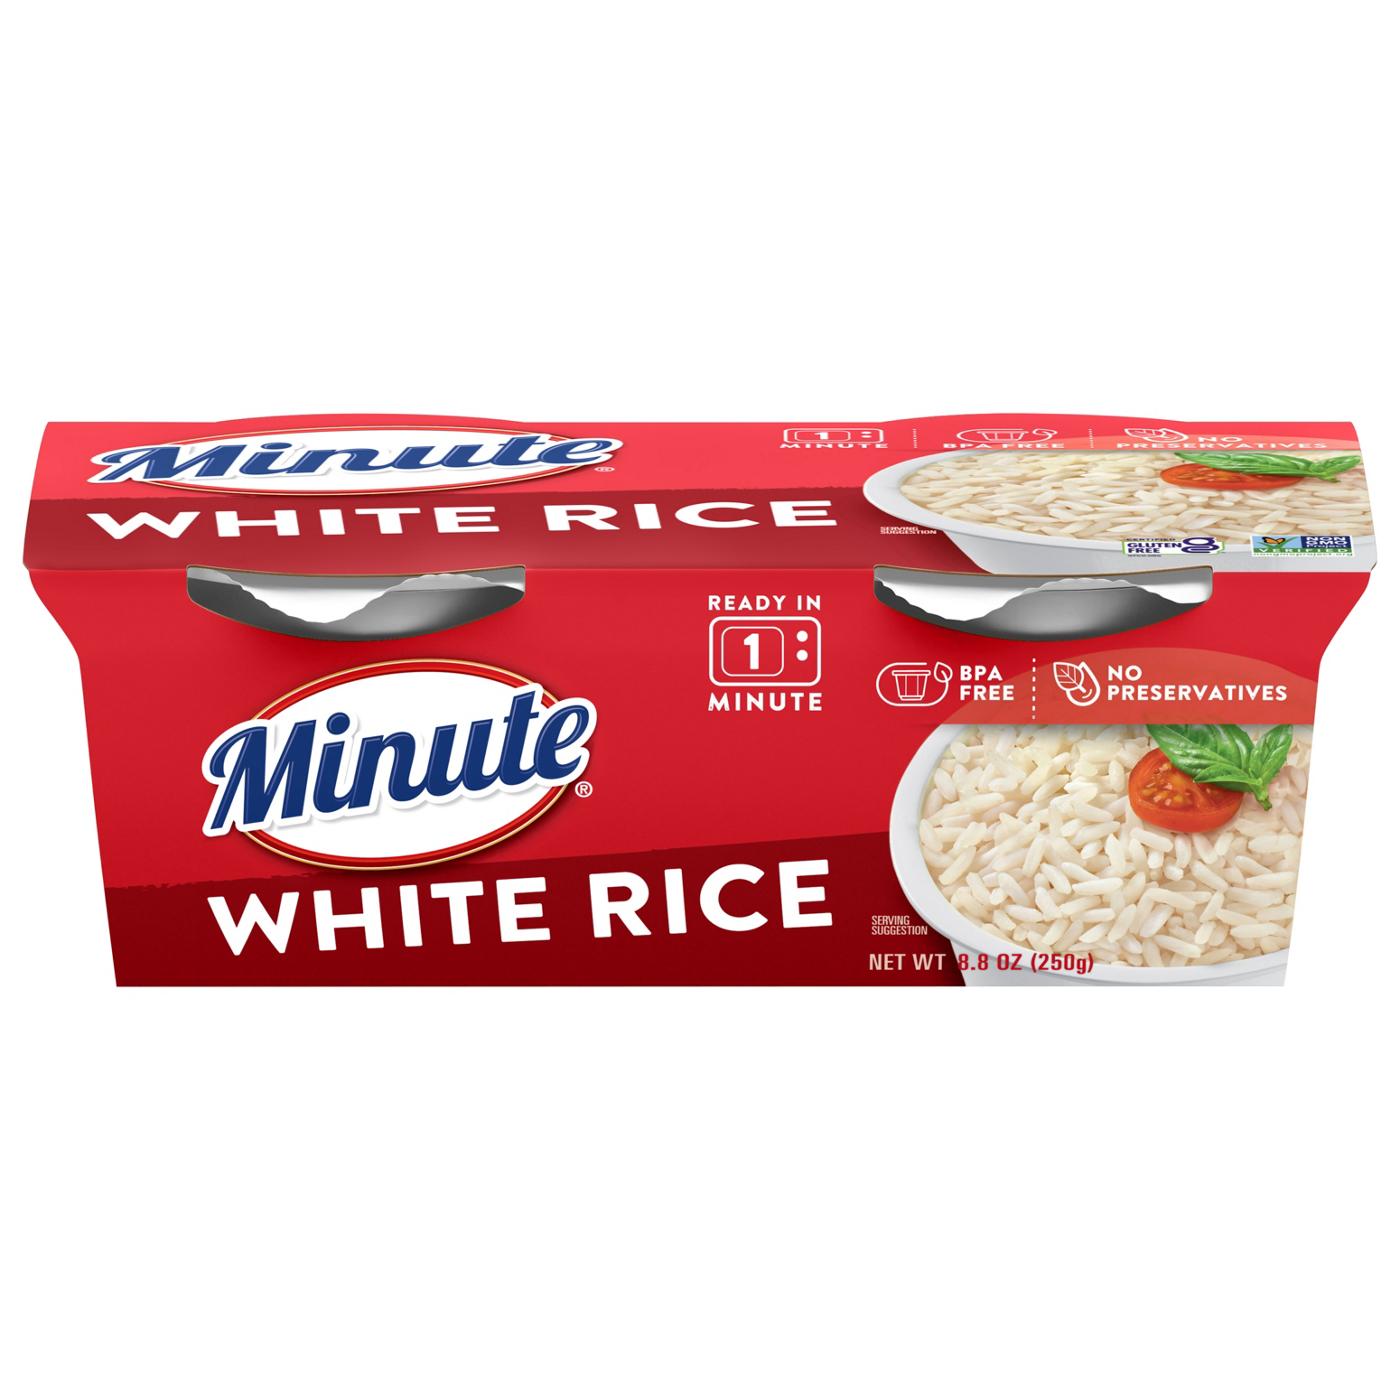 Minute Ready to Serve White Rice; image 1 of 7